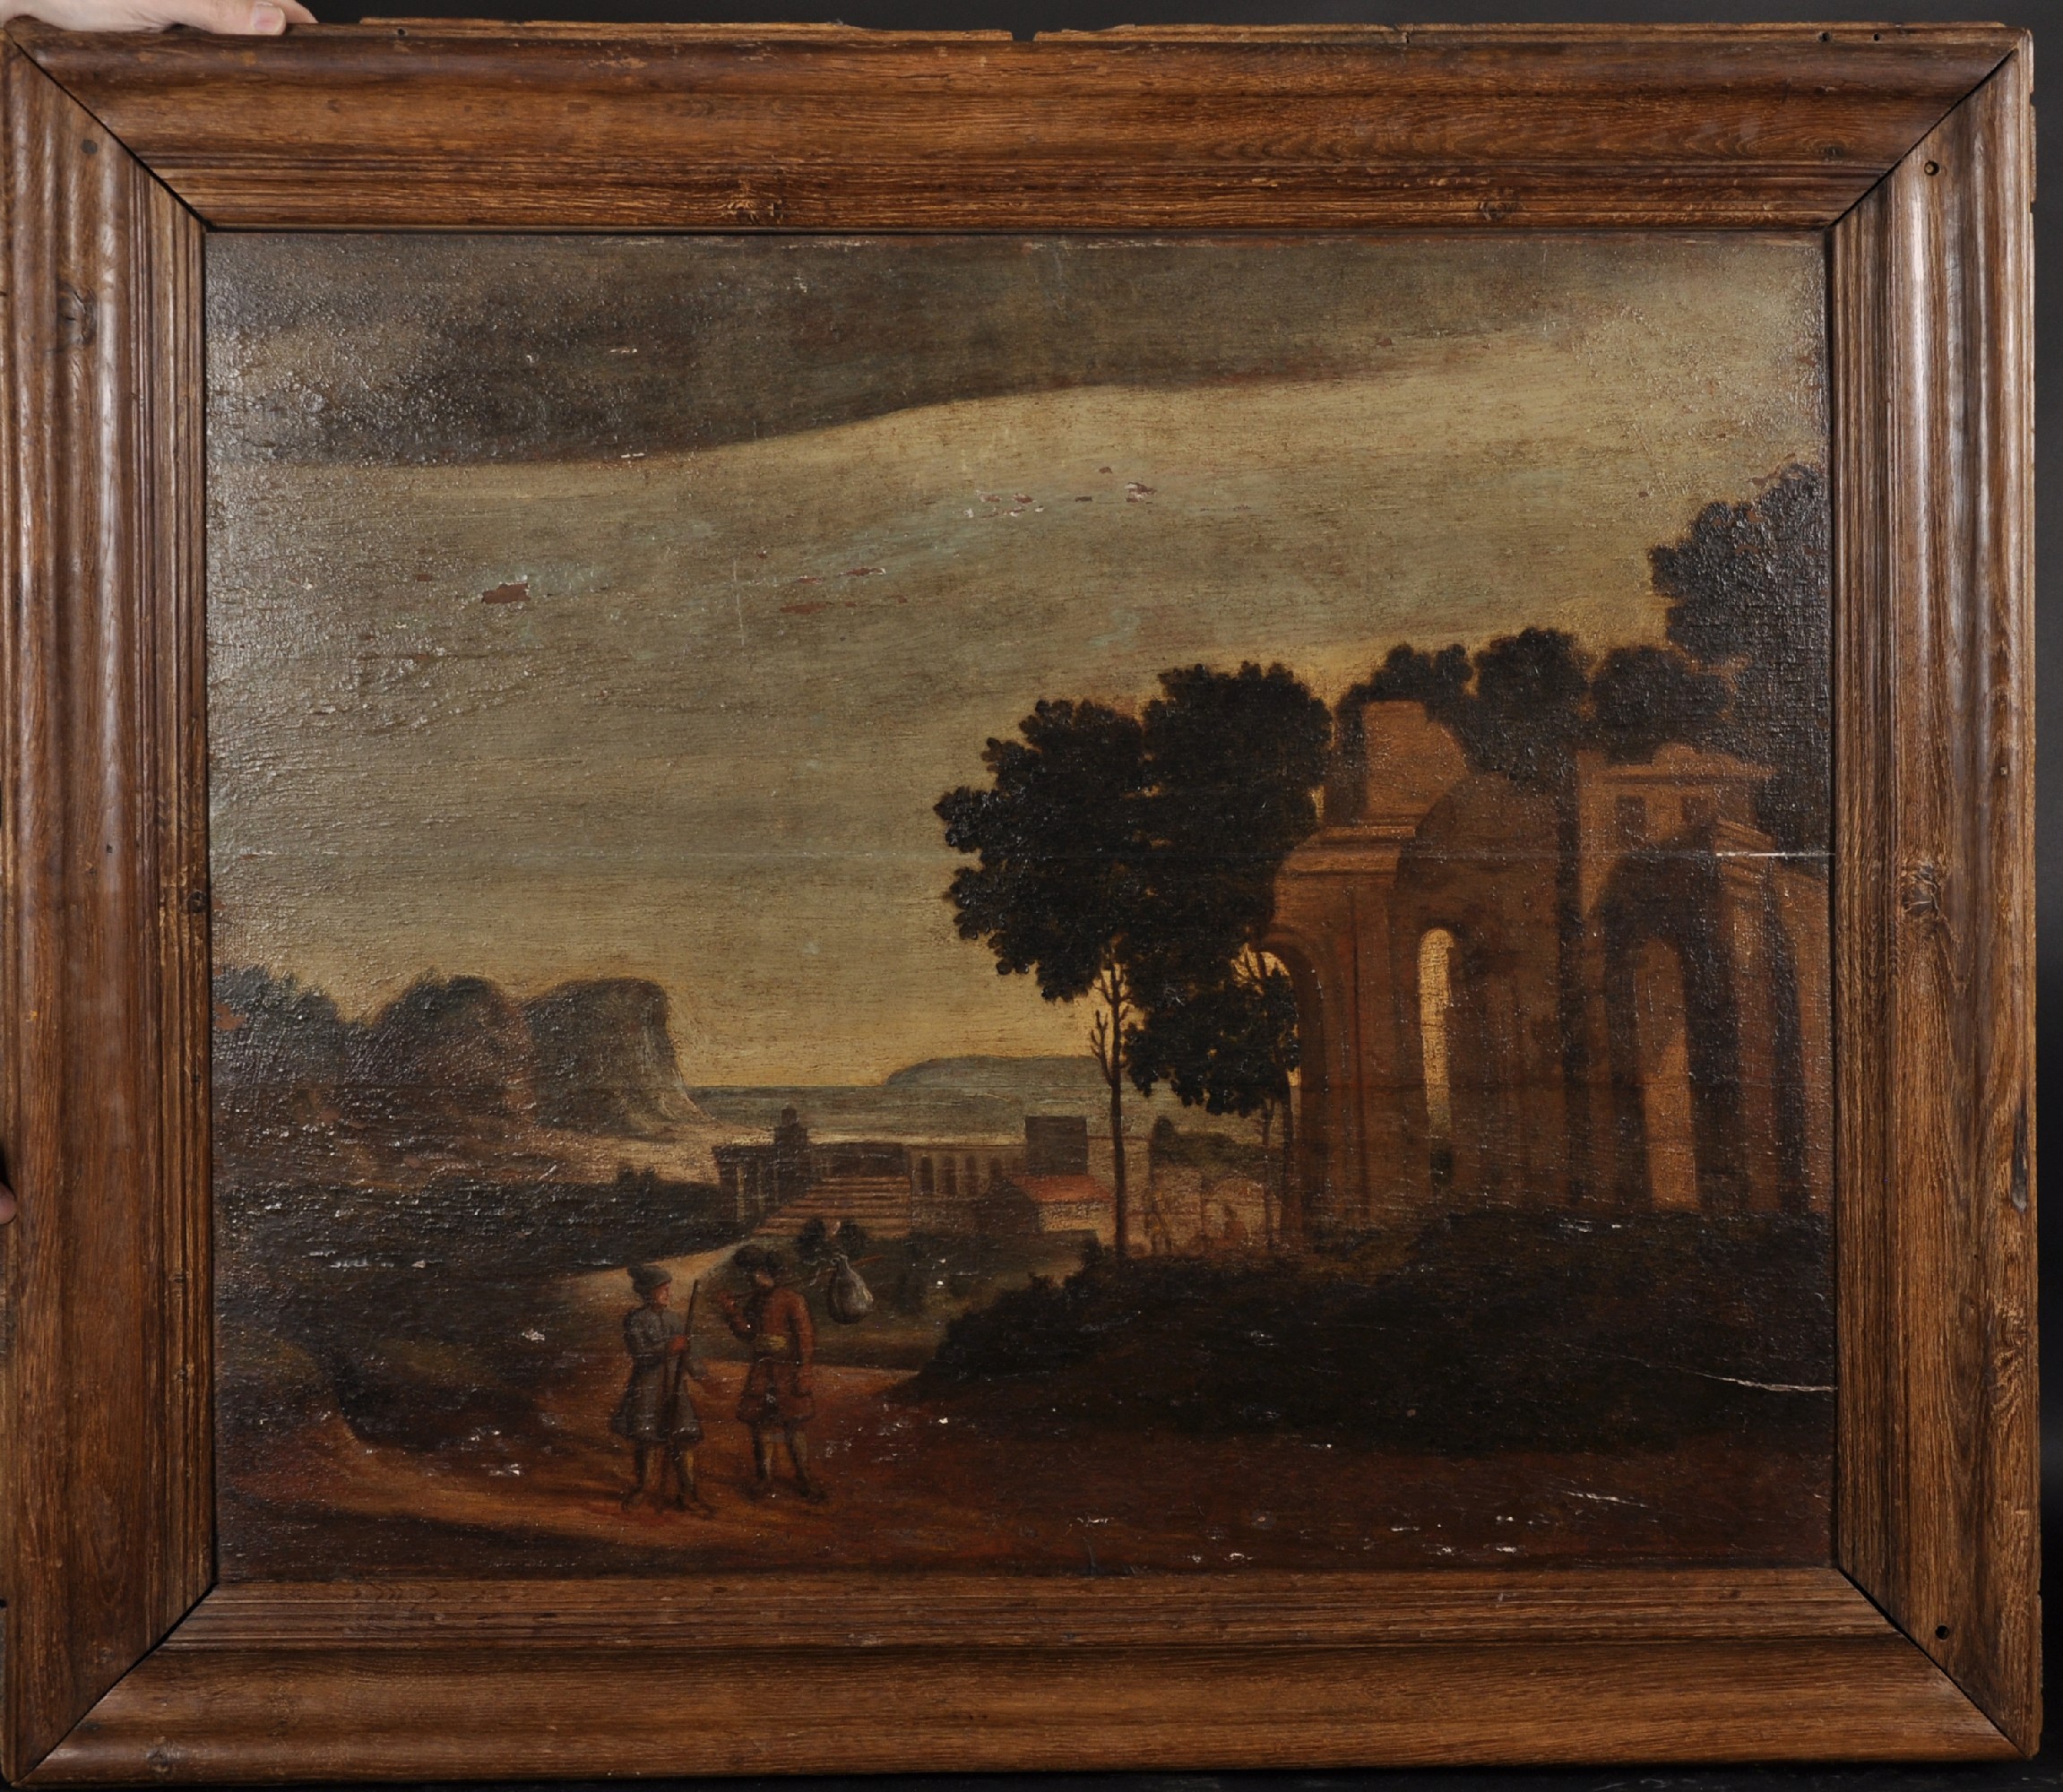 18th Century Dutch School. Figures in a Classical Landscape, Oil on Panel, 28" x 34.5". - Image 2 of 3